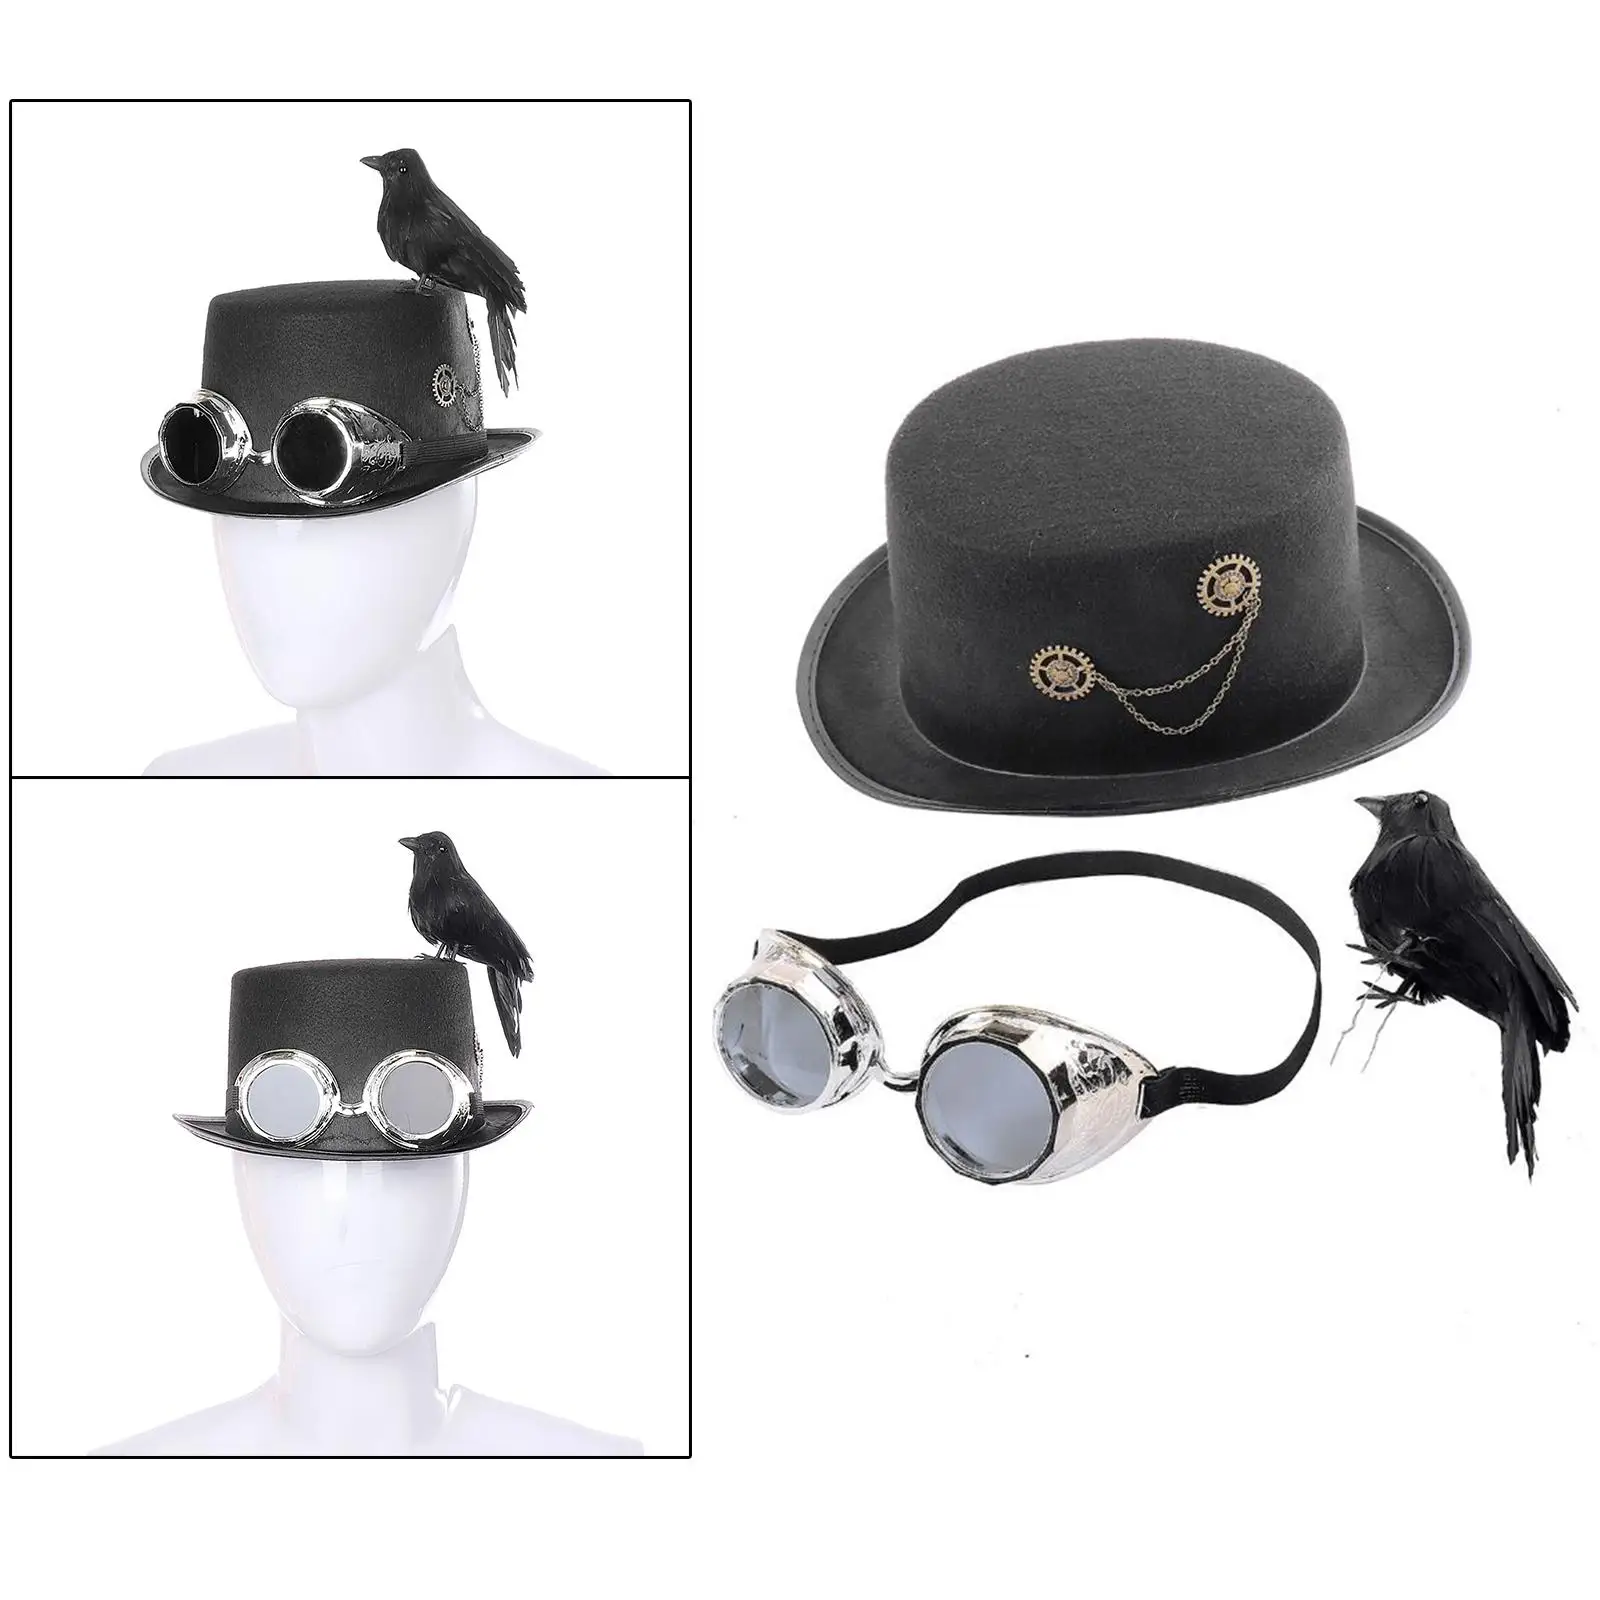 Deluxe Steampunk Top Hat with Goggles Headgear for Dressing Up